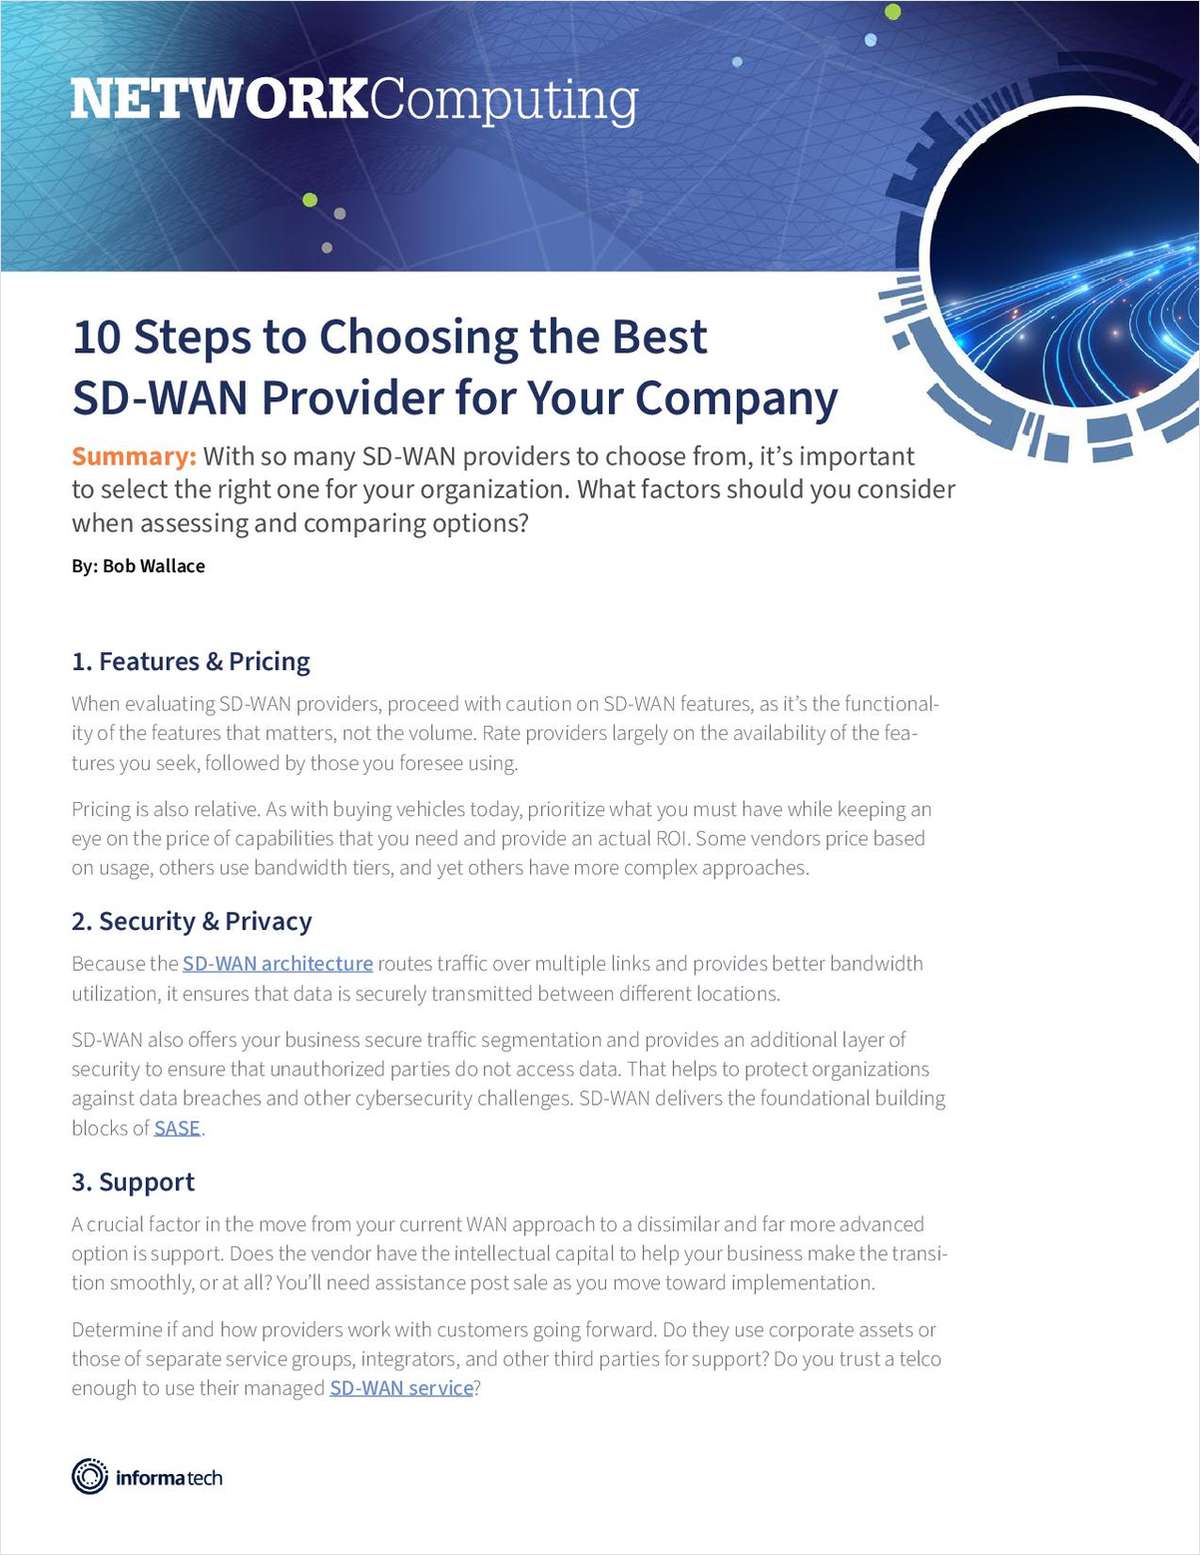 10 Steps to Choosing the Best SD-WAN Provider for Your Company